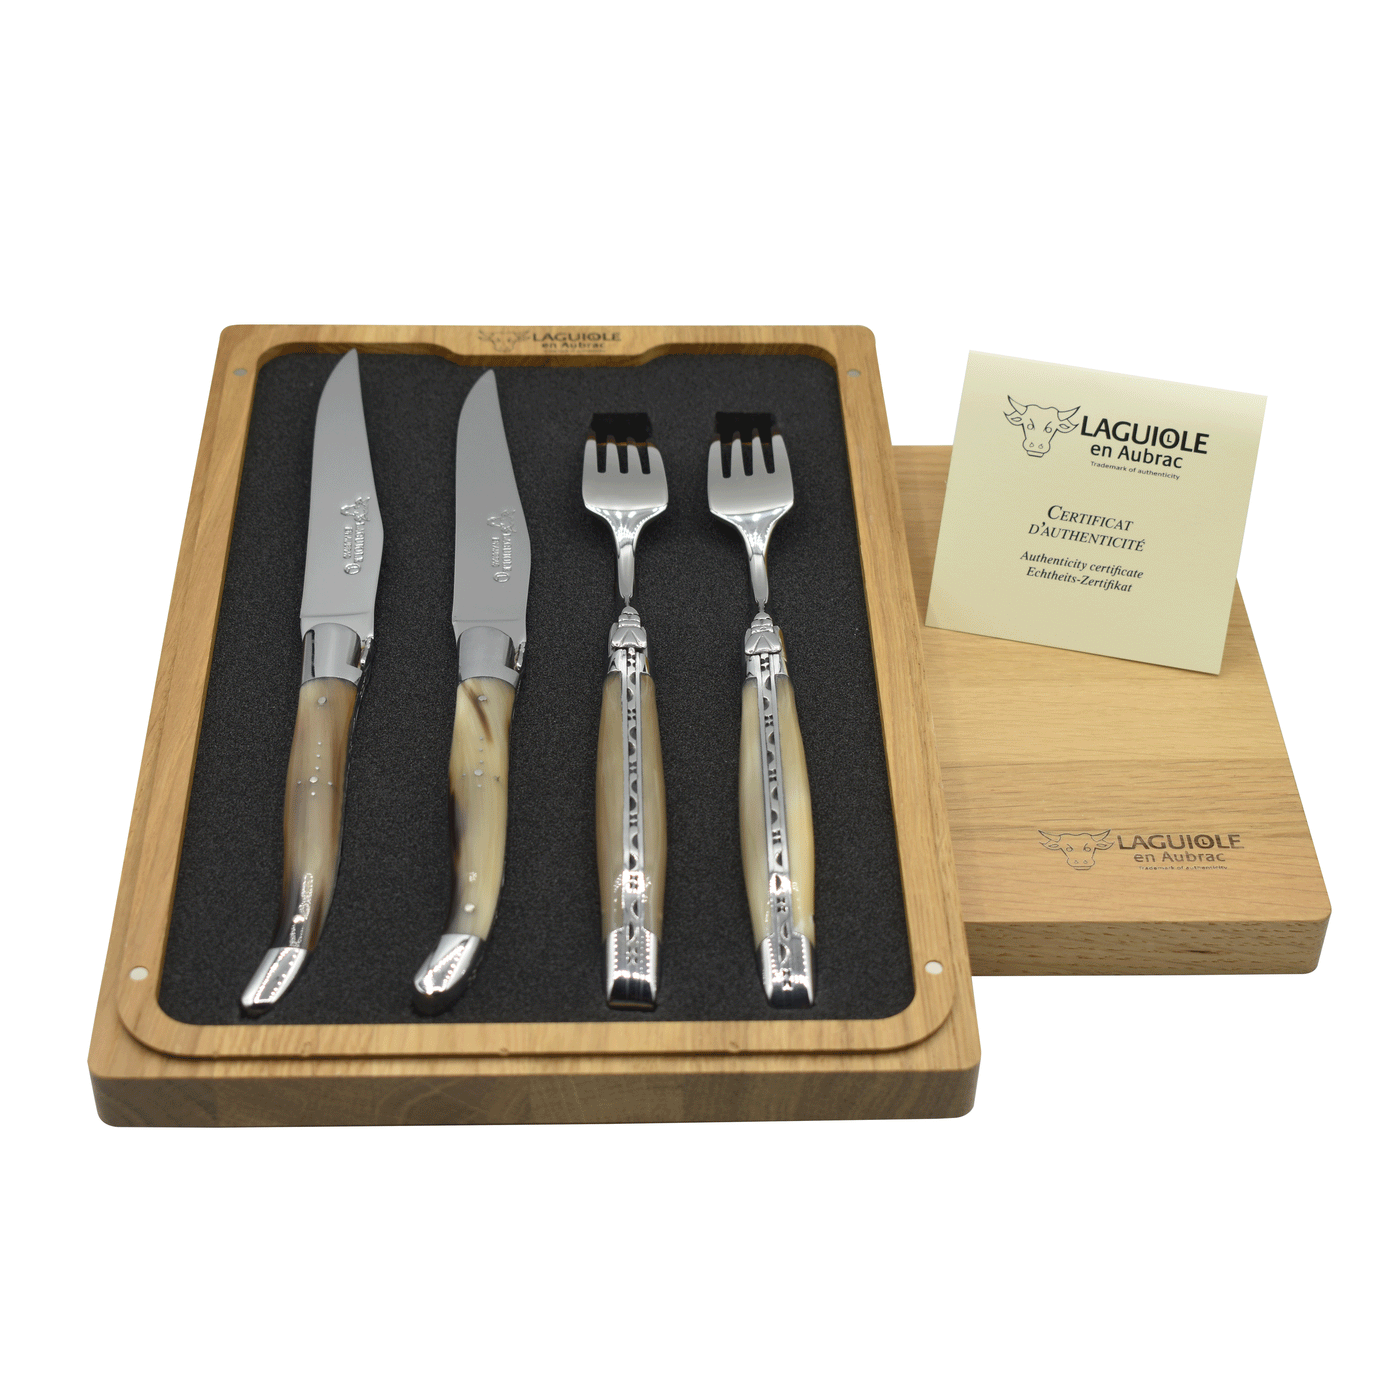 Laguiole en Aubrac Stainless Steel 4-Piece Set With 2 Steak Knives & 2 Forks With Solid Horn Handles - Kitchen Universe